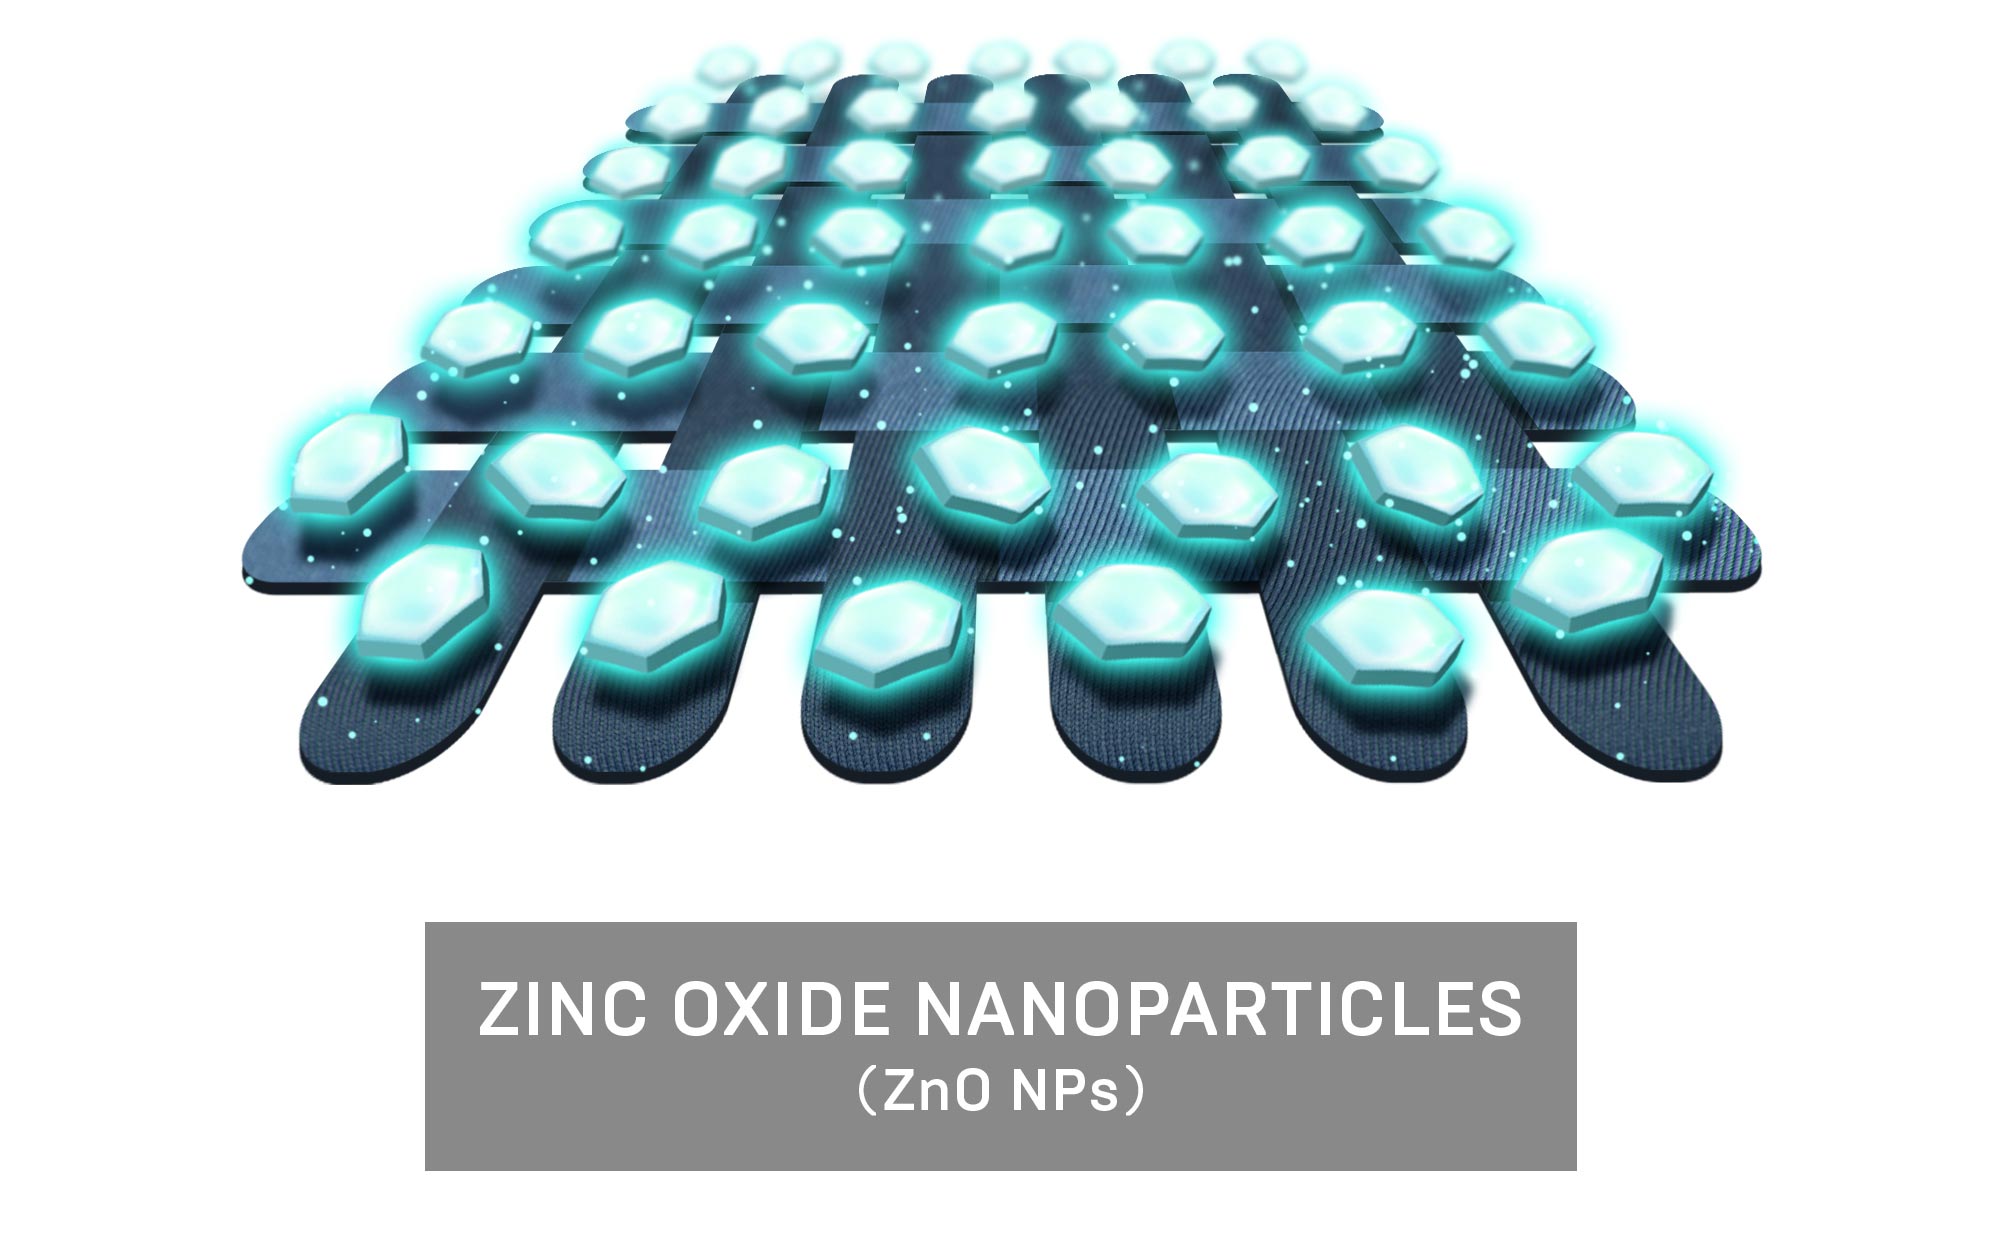 Zinc Oxide (ZnO) nanoparticles disrupt the bacterial cell membrane to down-regulate genes in bacteria.